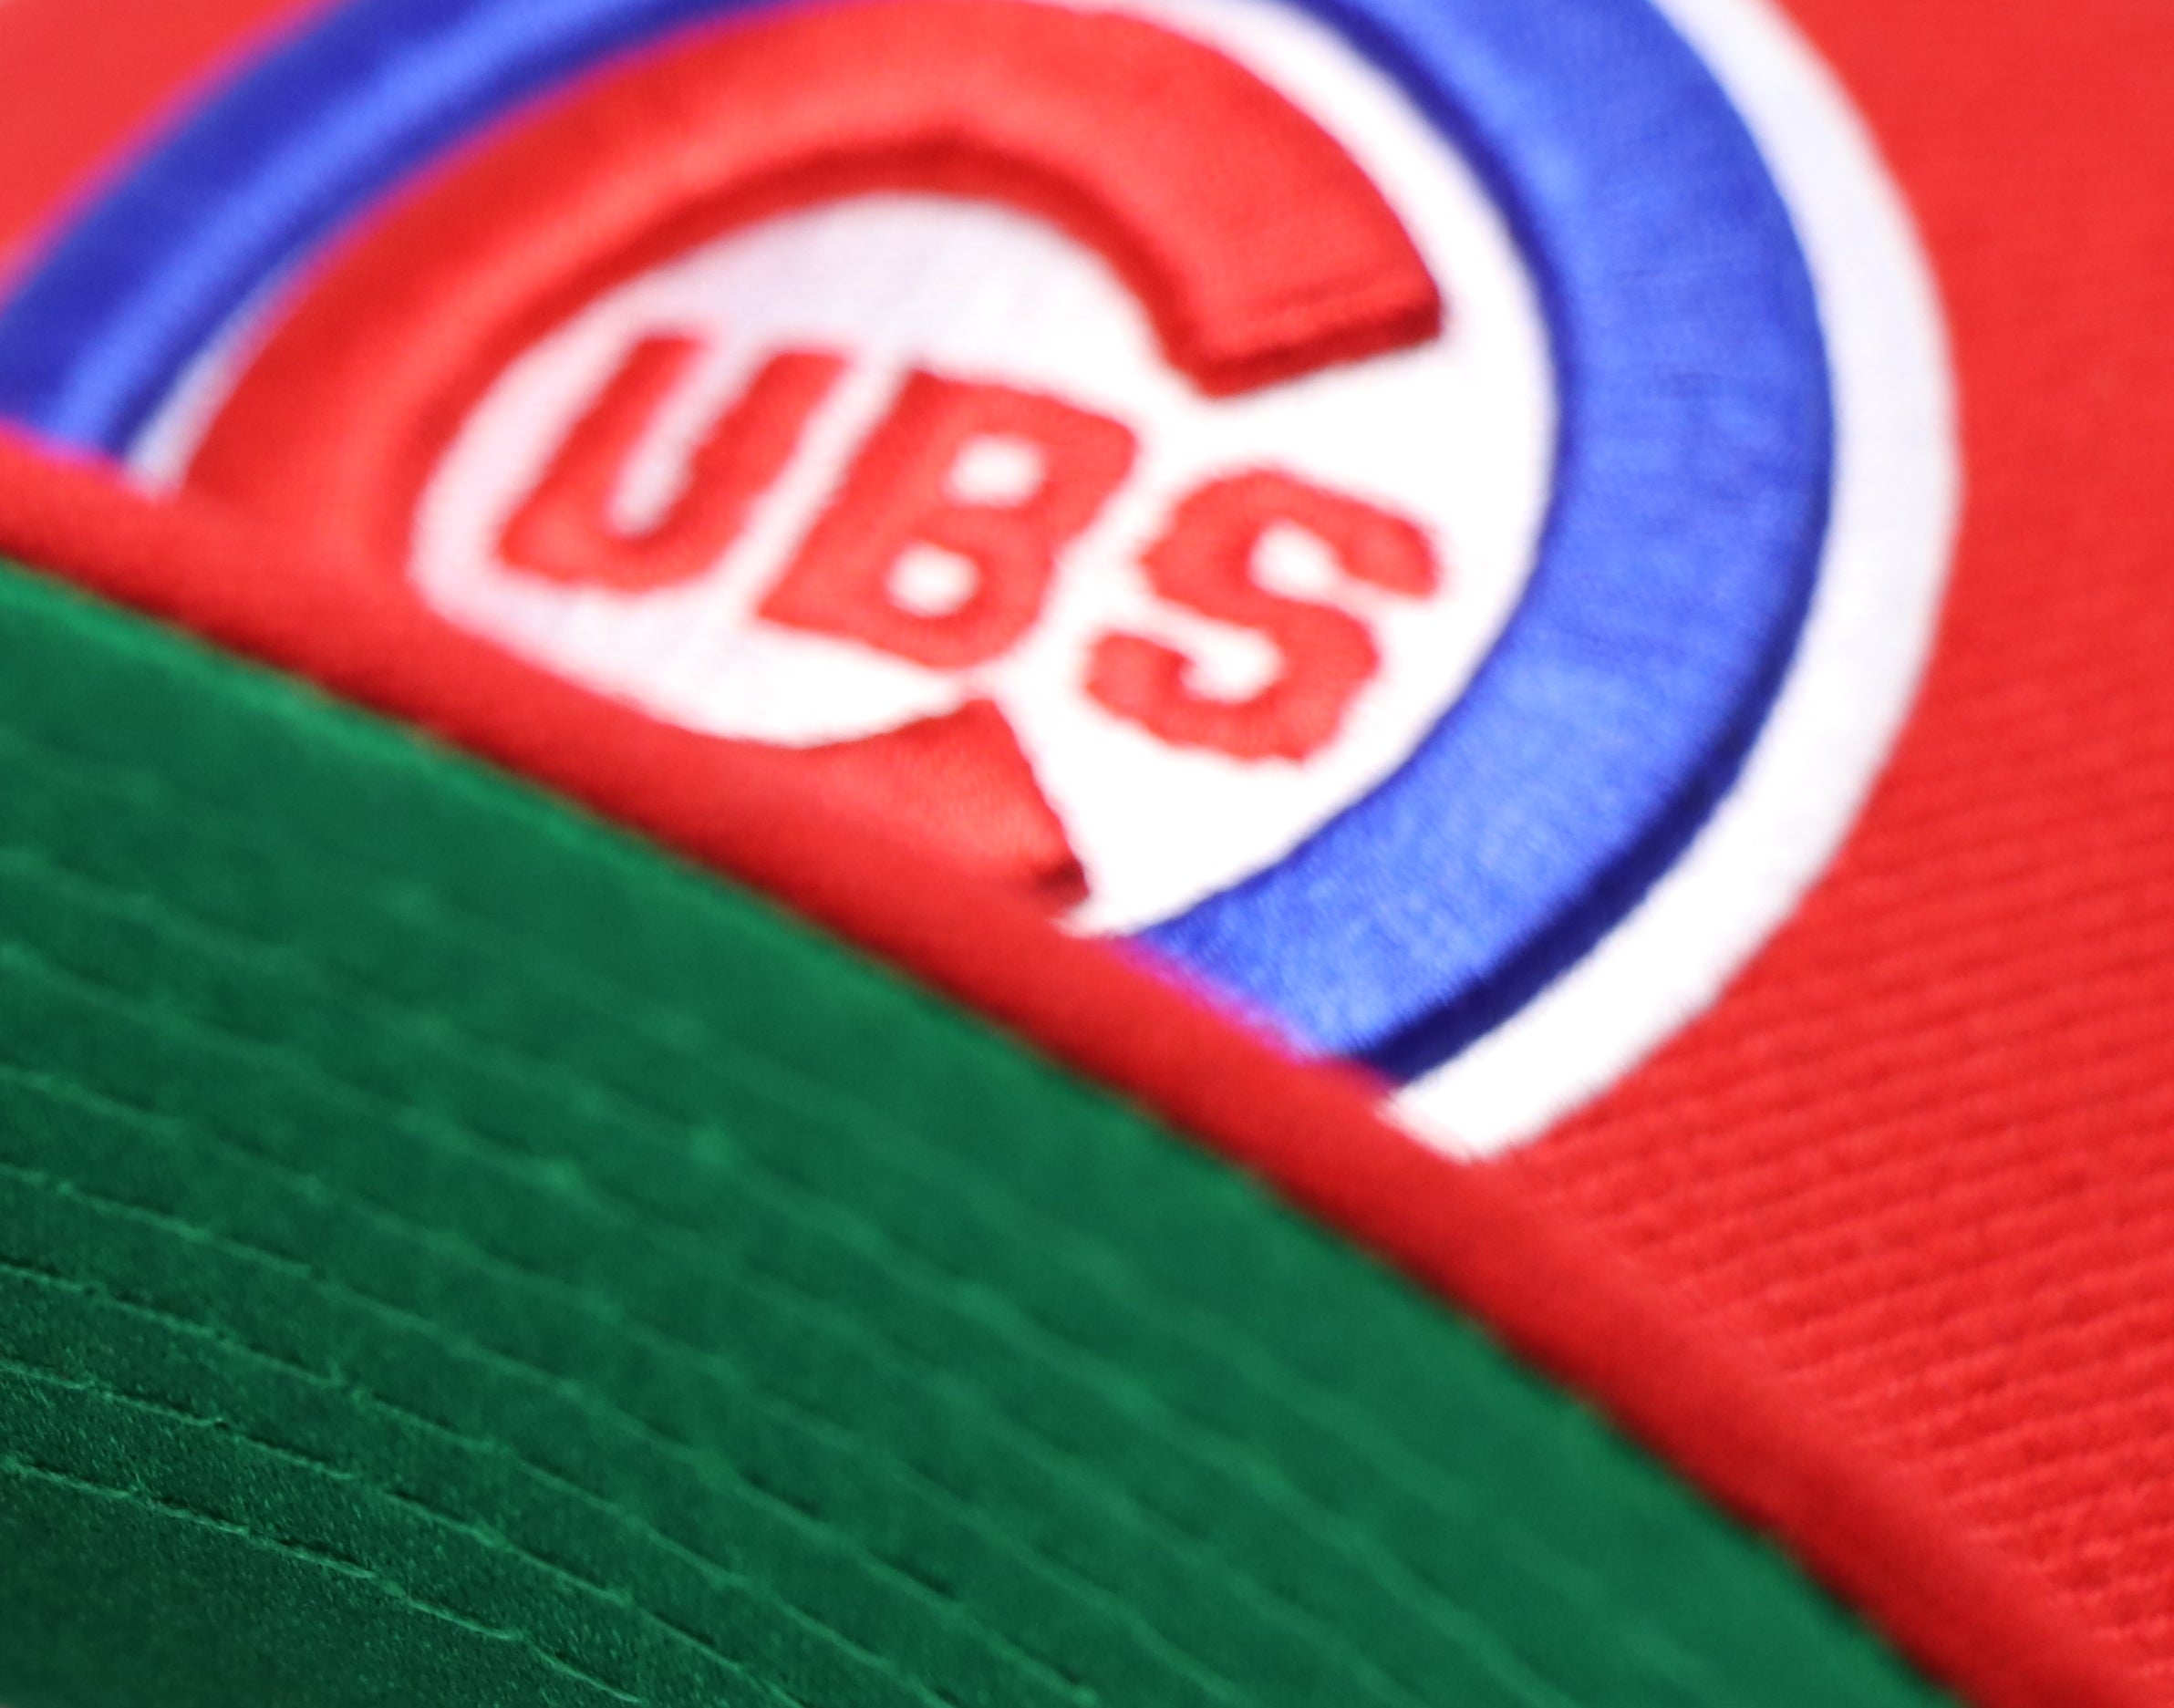 CHICAGO CUBS (WRIGLEY FIELD 100TH ANNIVERSARY) NEW ERA 59FIFTY FITTED (GREEN UNDERVISOR)